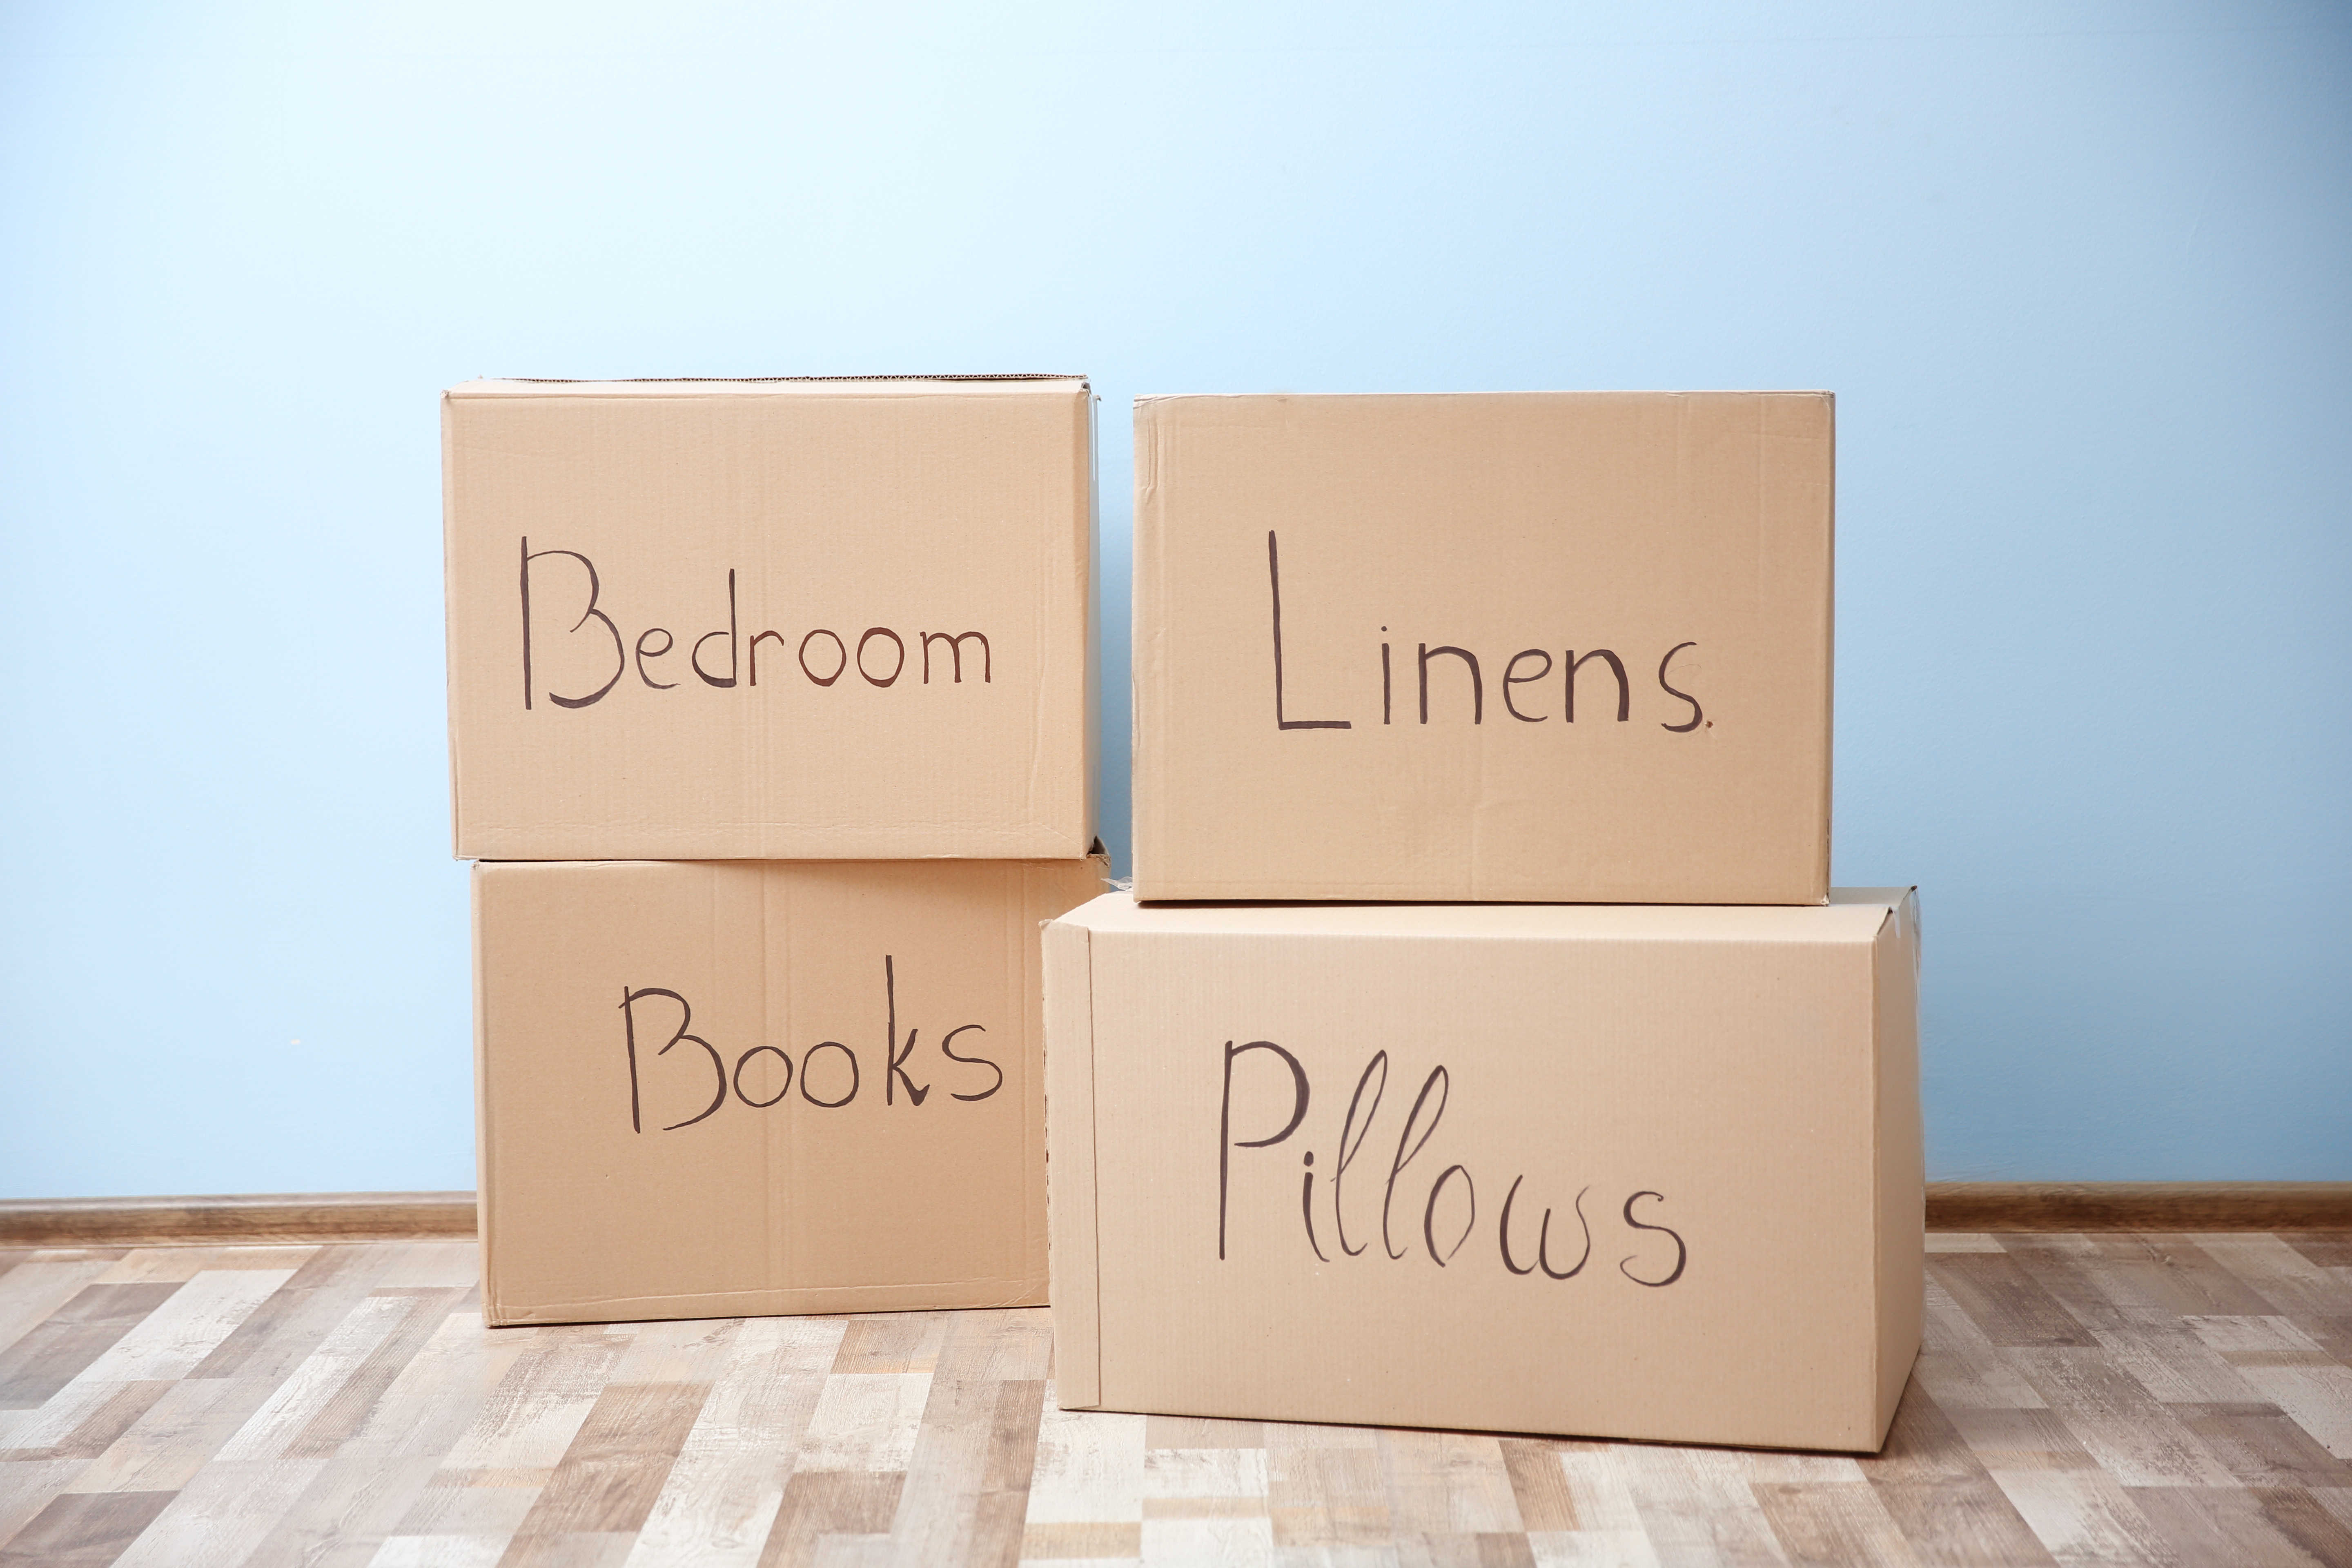 Moving House - Choosing a Solicitor